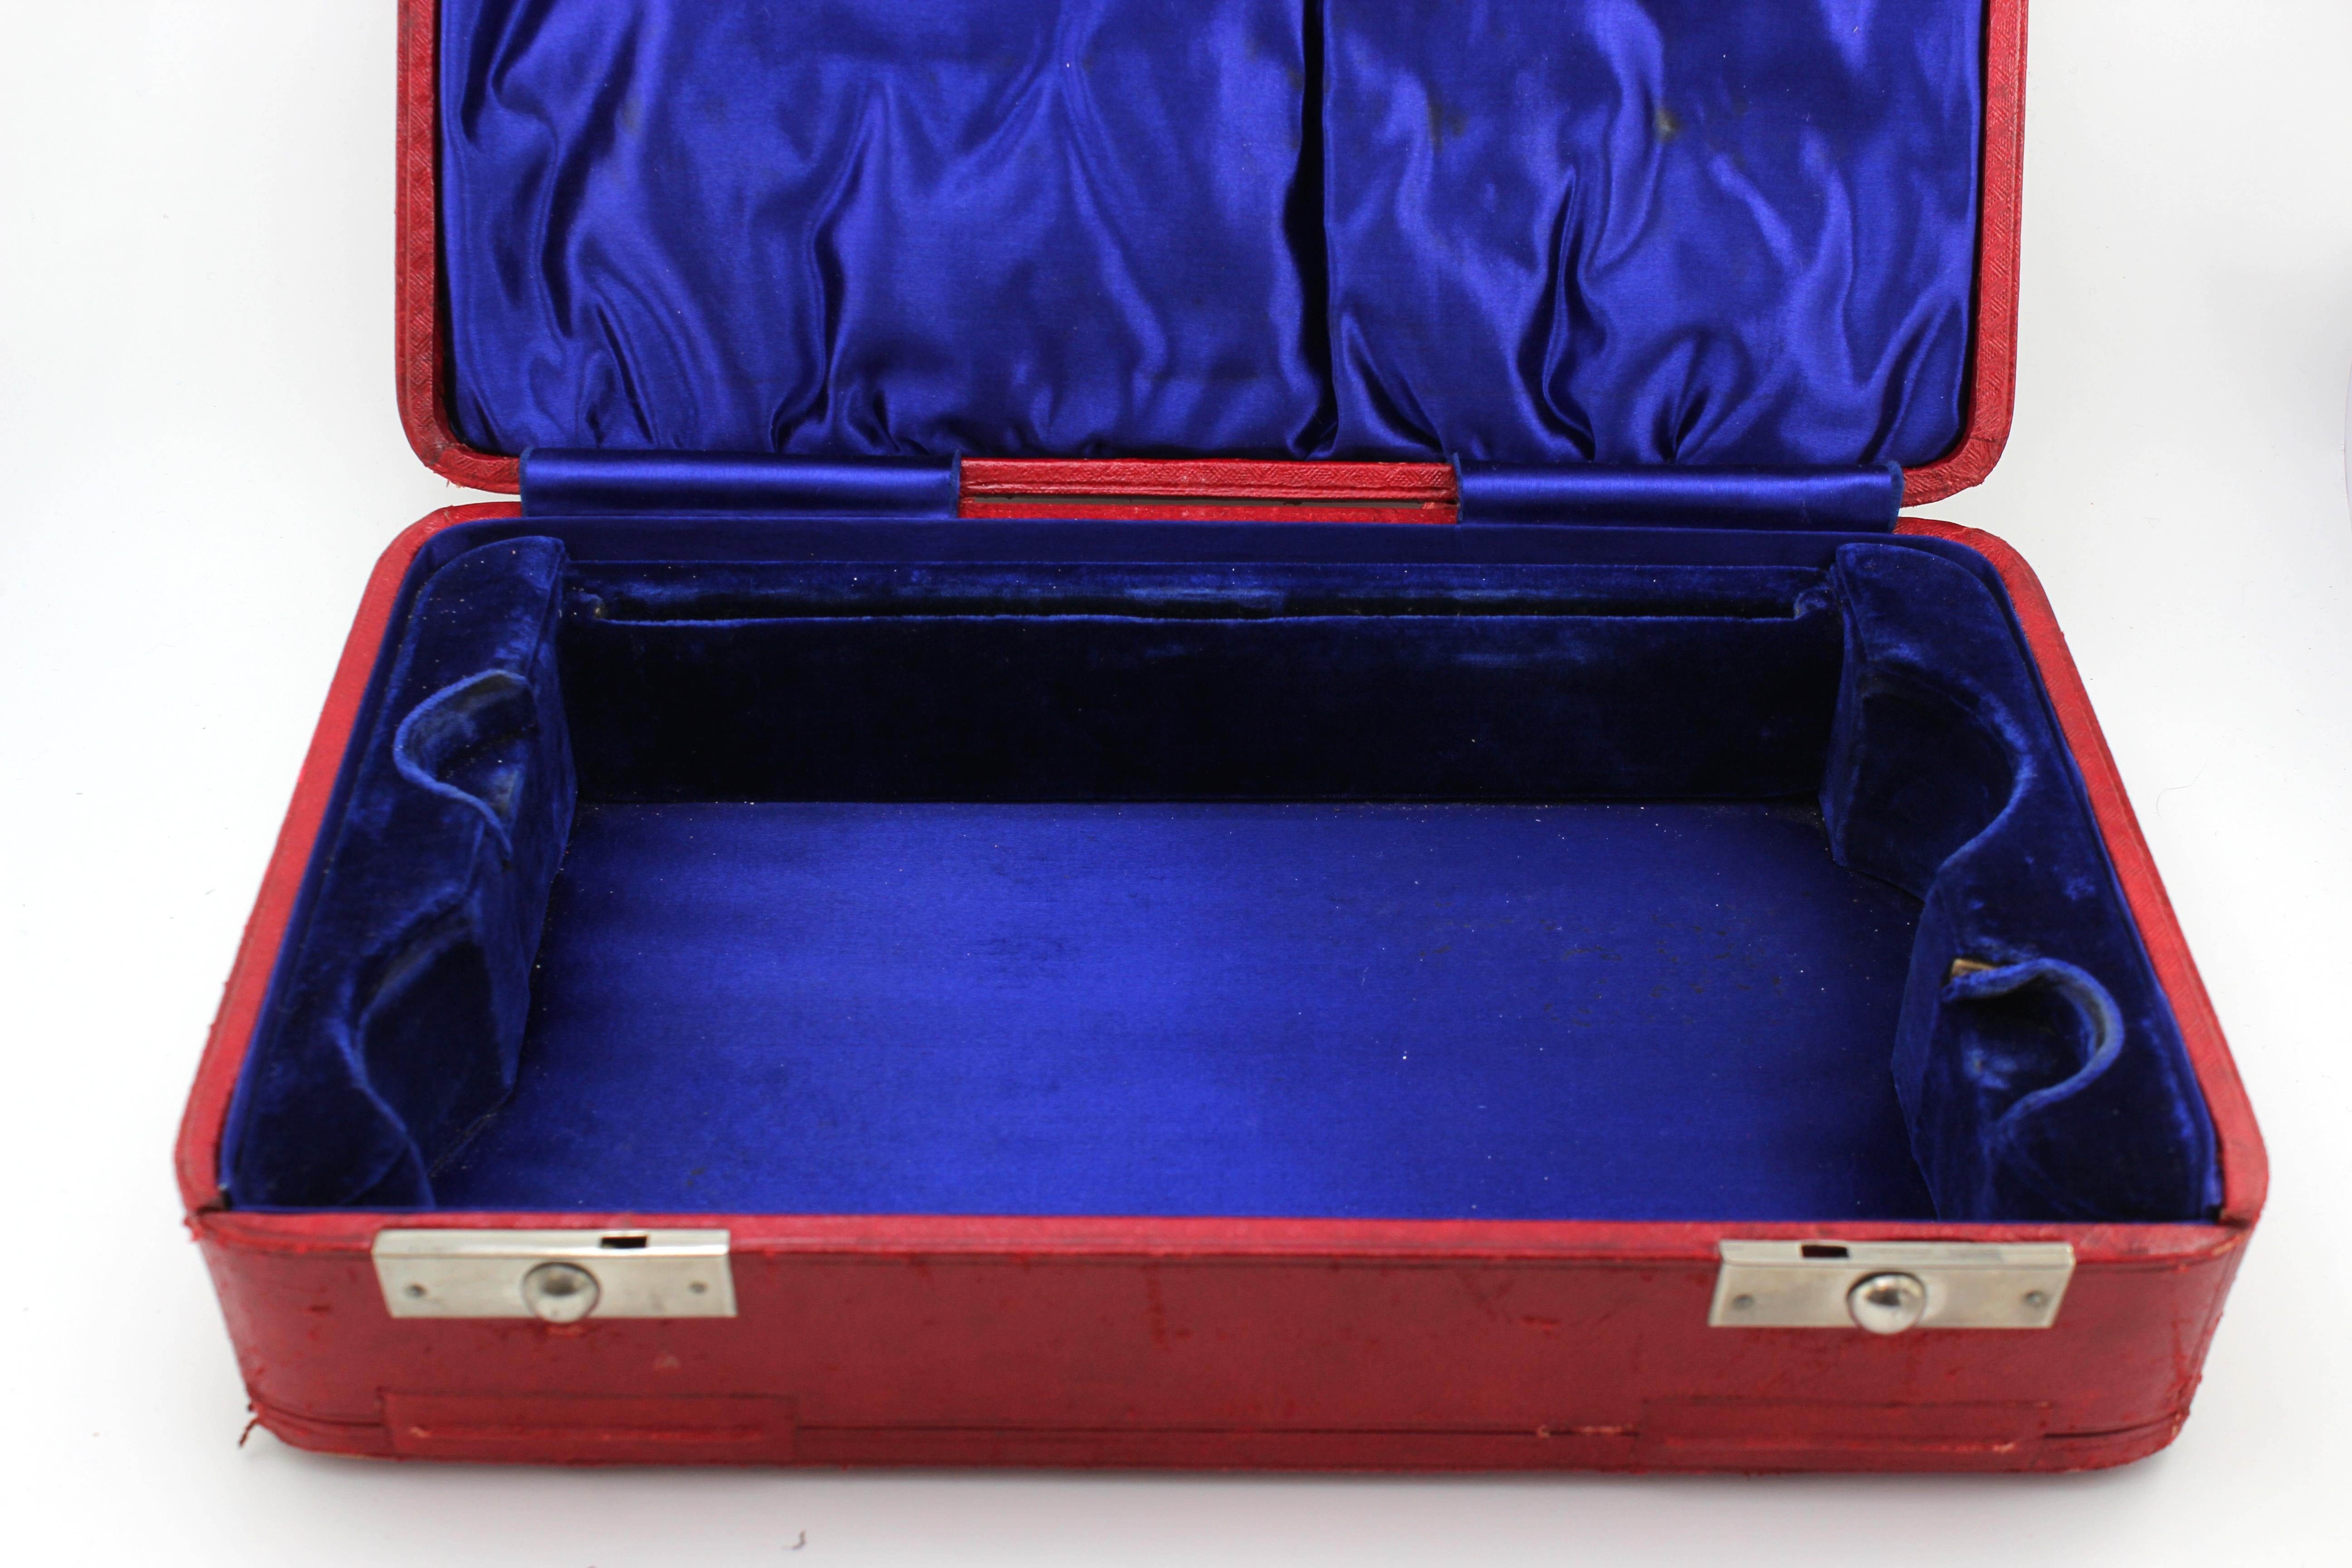 Antique Leather Storage Box with Blue Velvet Interior, Circa 1900 In Good Condition For Sale In Braintree, GB